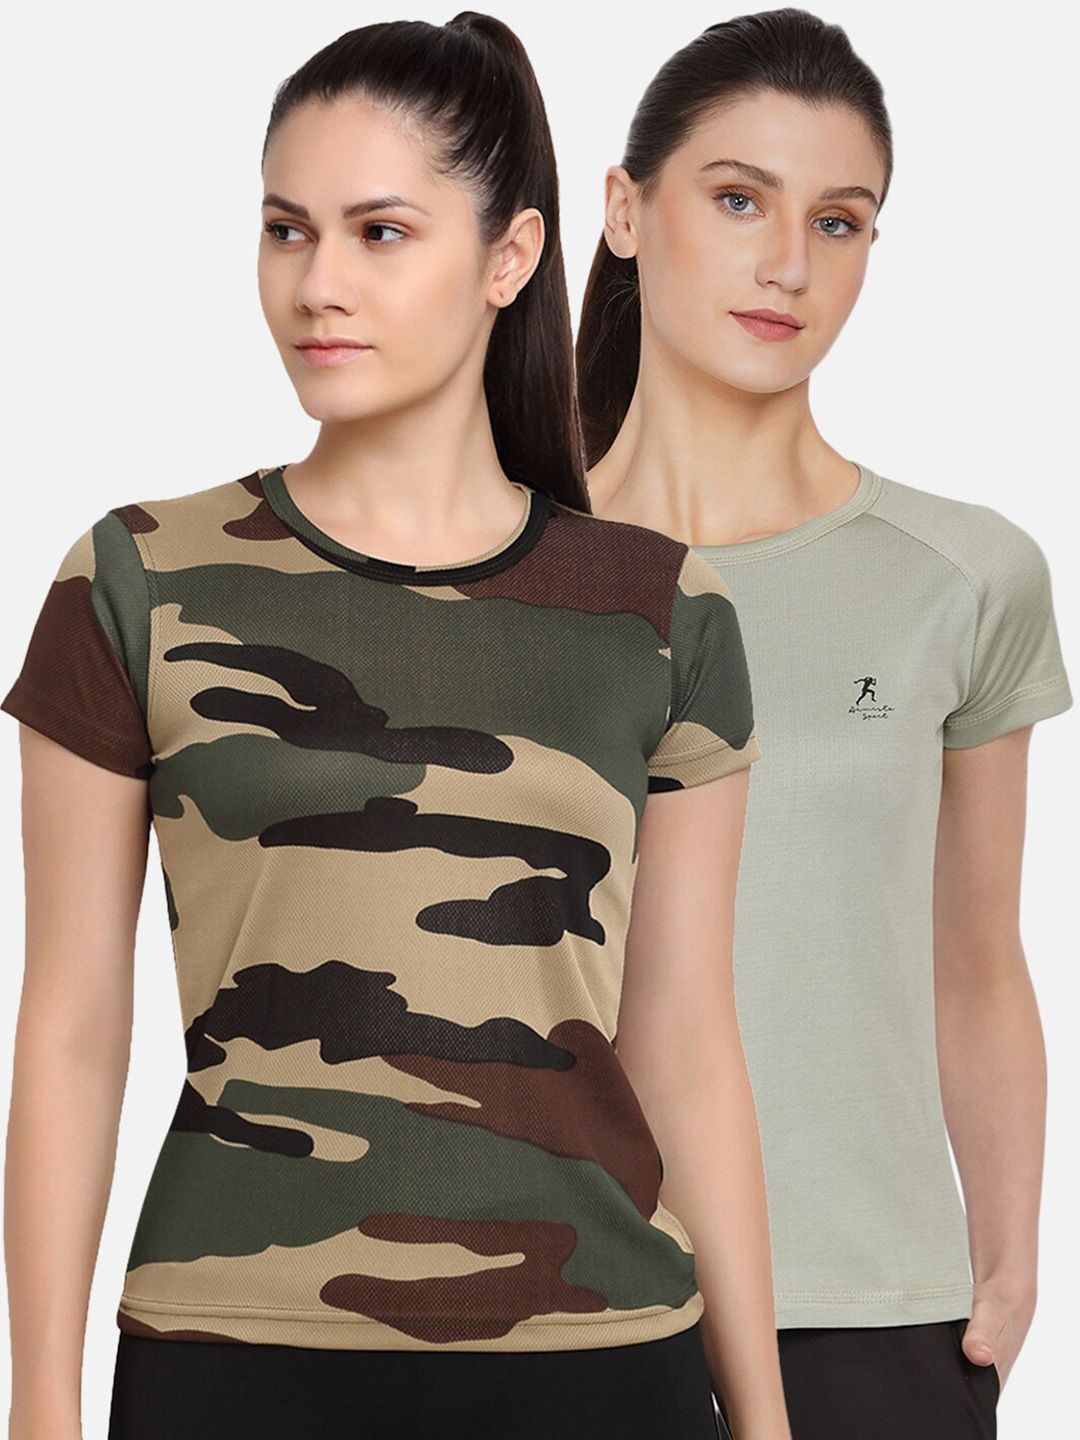 ARMISTO Women Olive Green Camouflage Printed Dri-FIT Training or Gym T-shirt Set Of 2 Price in India